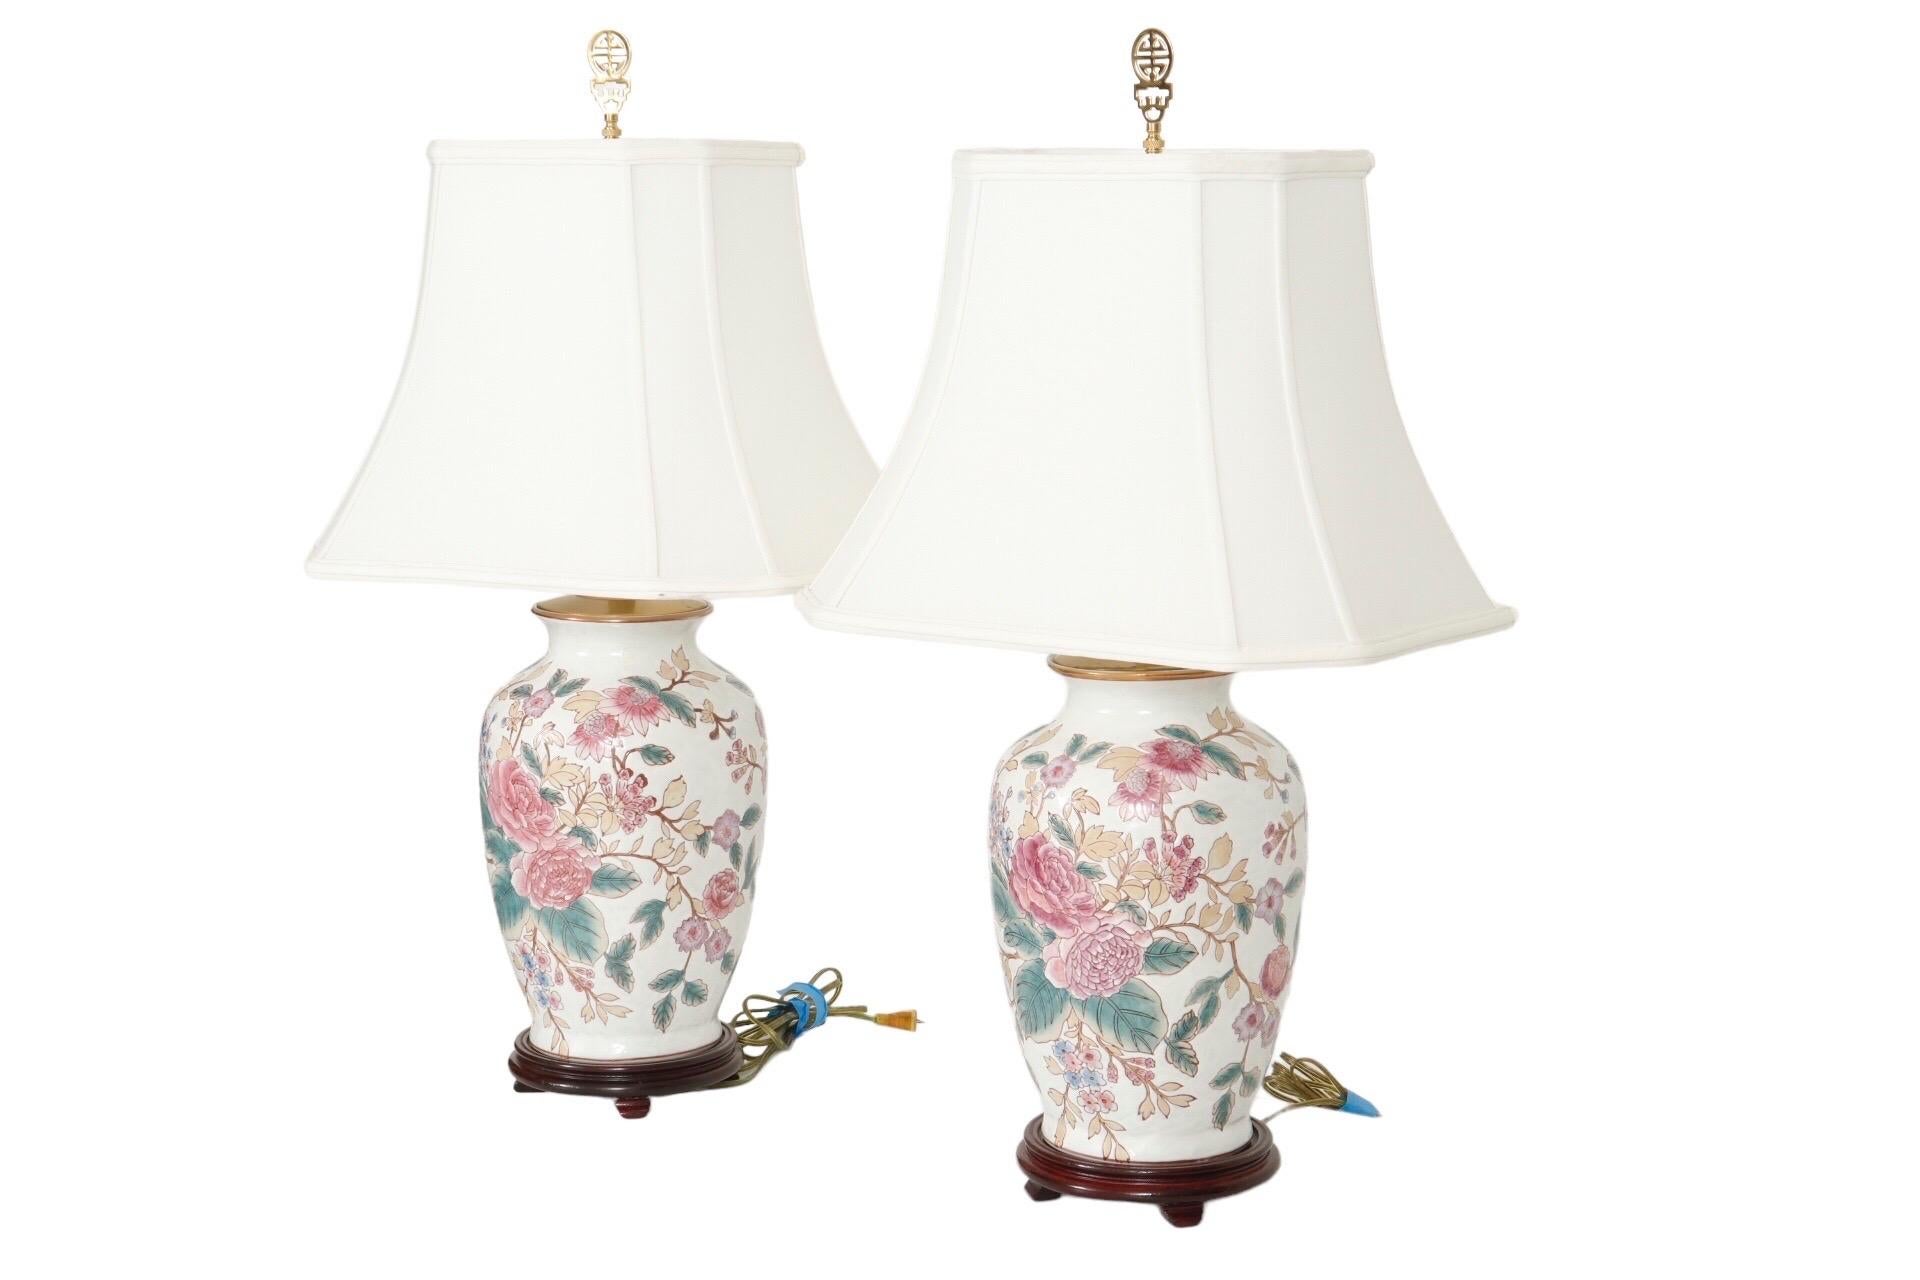 A pair of Ming style ceramic table lamps. Hand painted with subtle pink peonies, sprigs of crab apple flowers, and pale green and beige leaves on a white background. Crab apple flowers and peonies suggest the phrase 